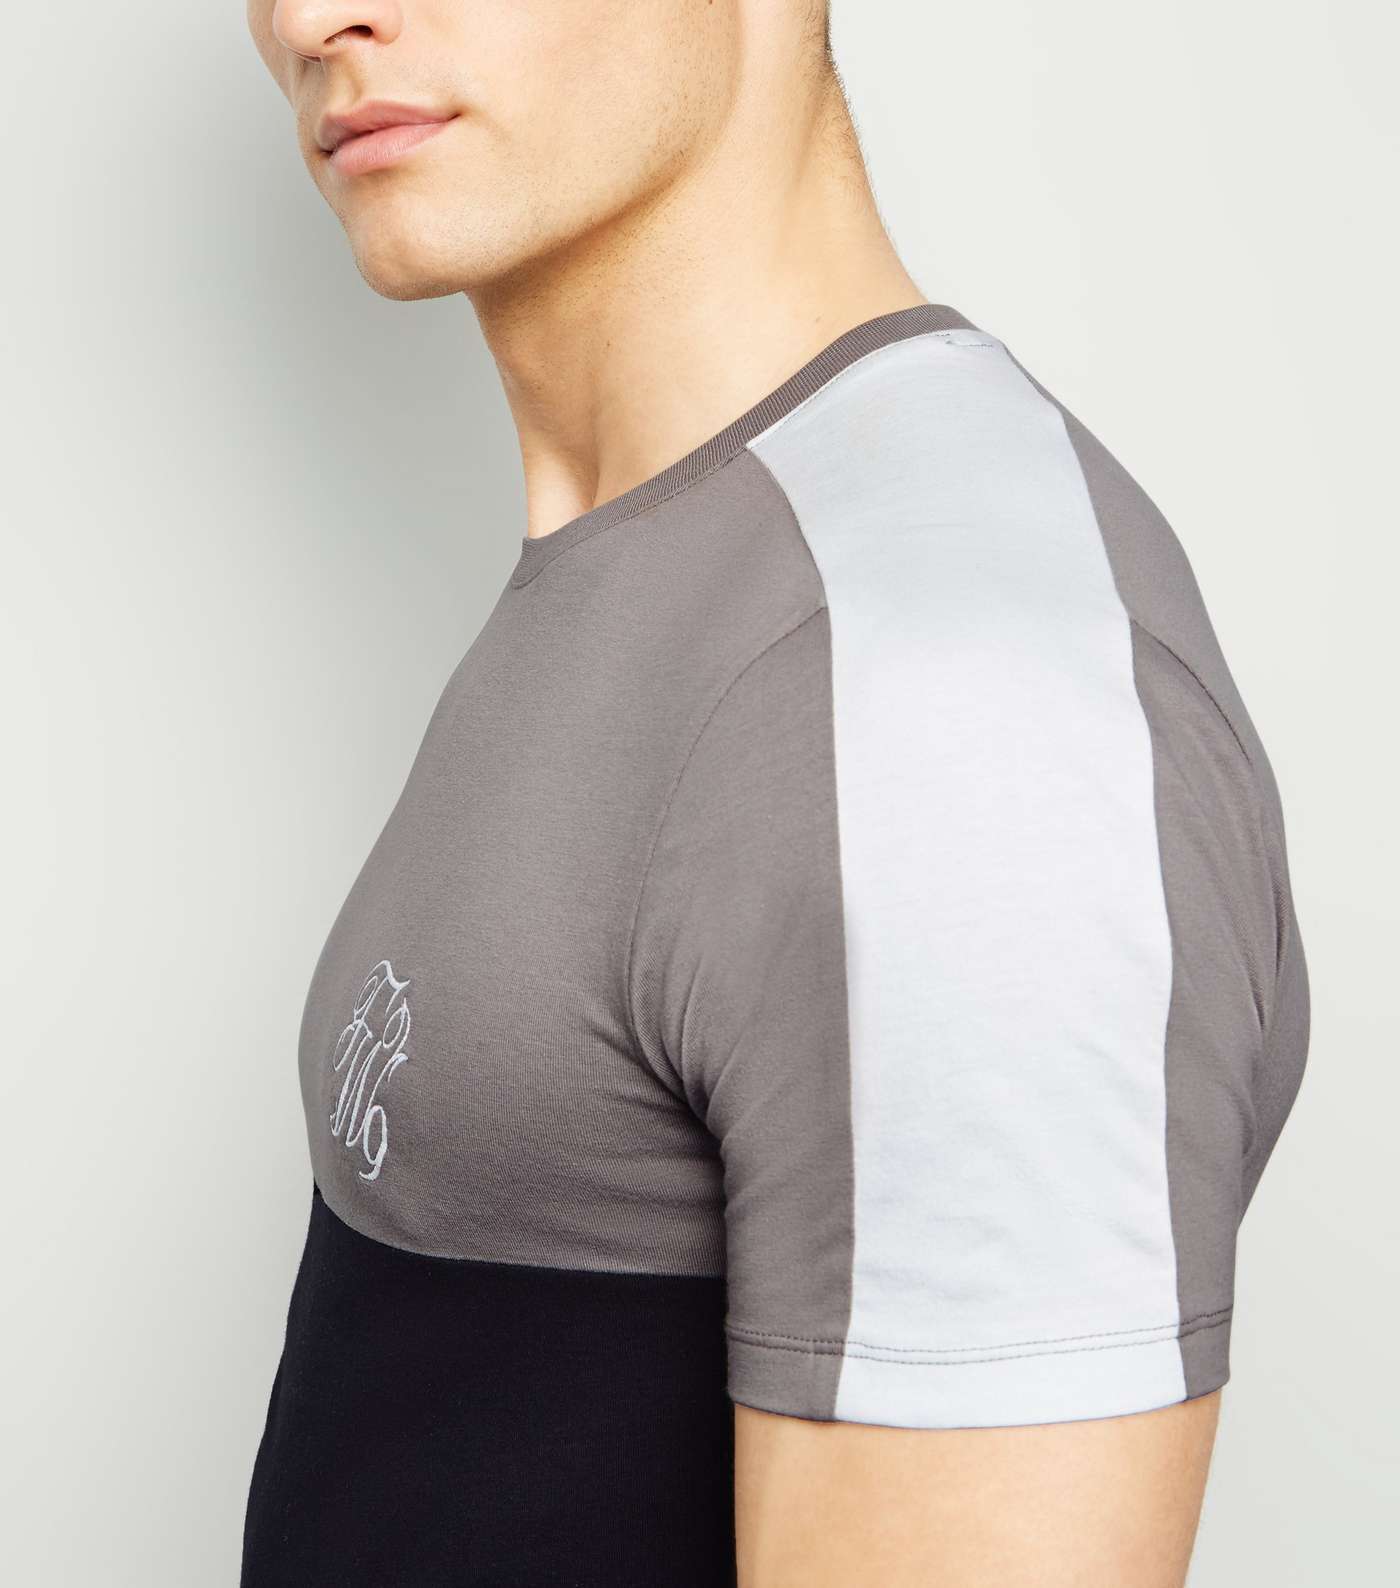 Pale Grey TW9 Embroidered Muscle Fit T-Shirt Image 5